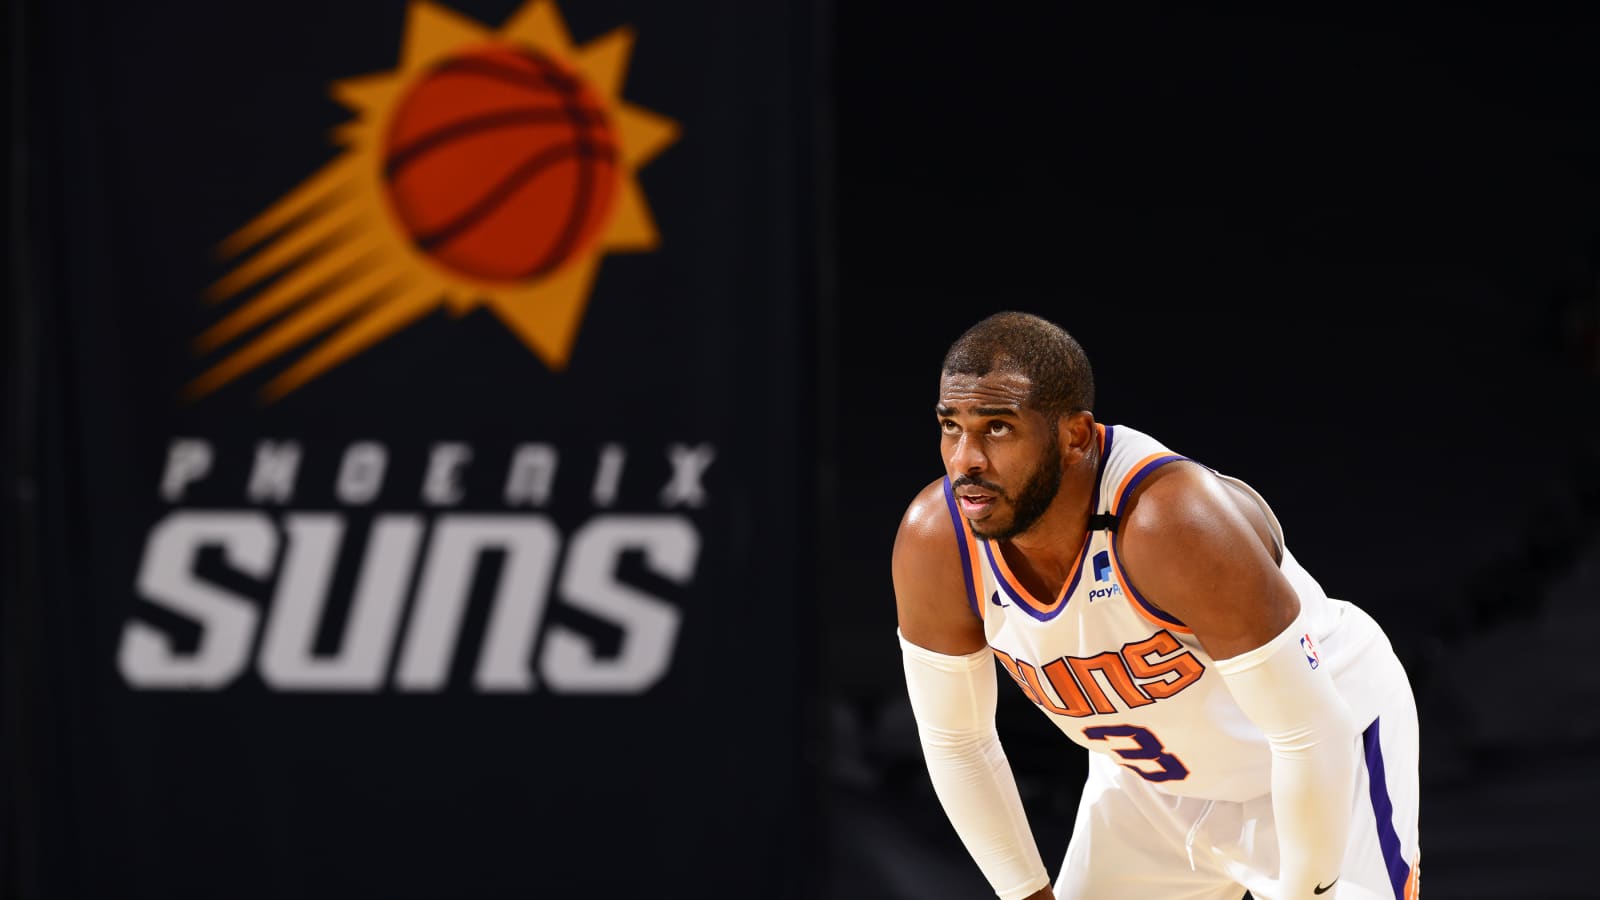 Chris Paul starts Goalsetter campaign to deposit money in minority youth accounts